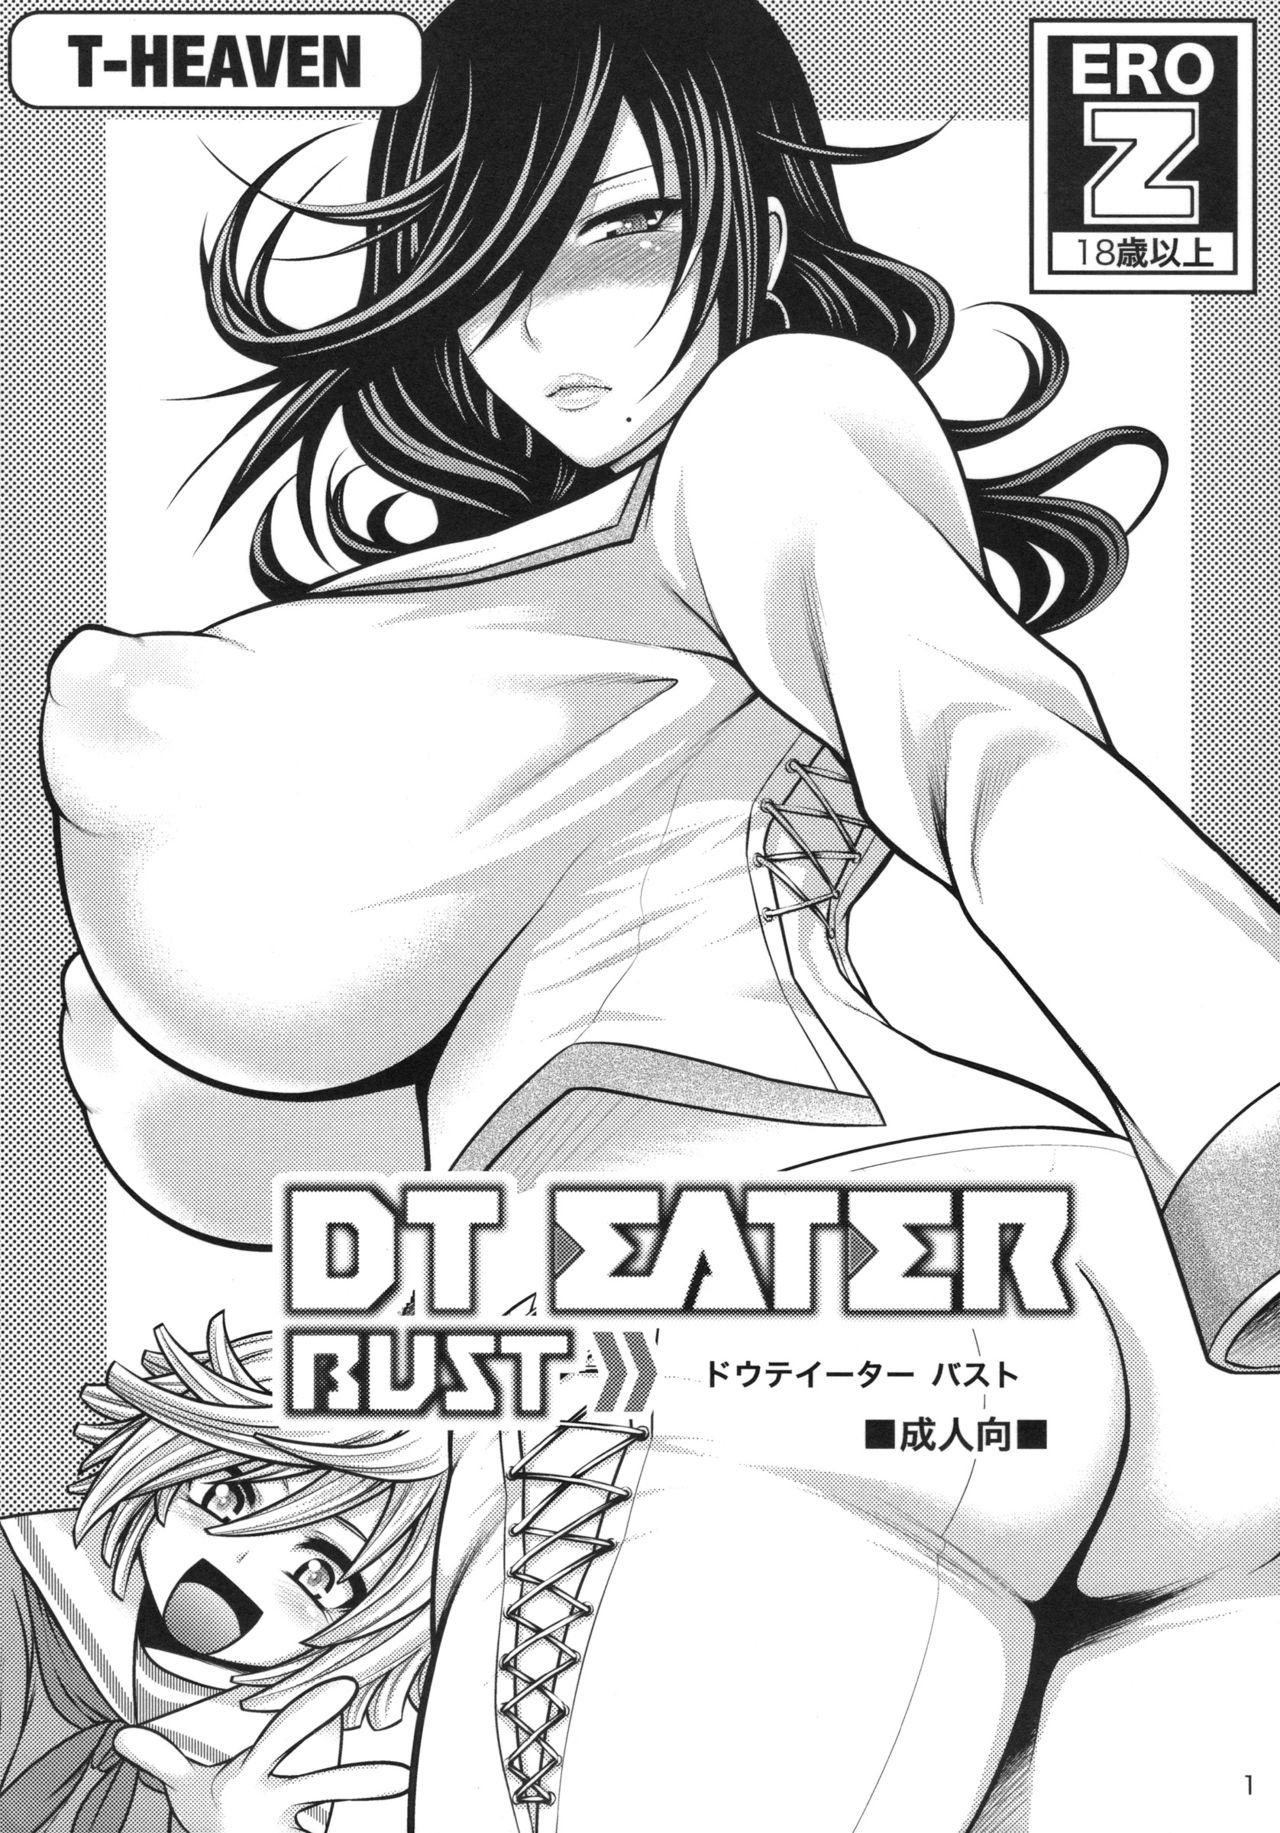 Ano DT EATER BUST - God eater Eating Pussy - Picture 1